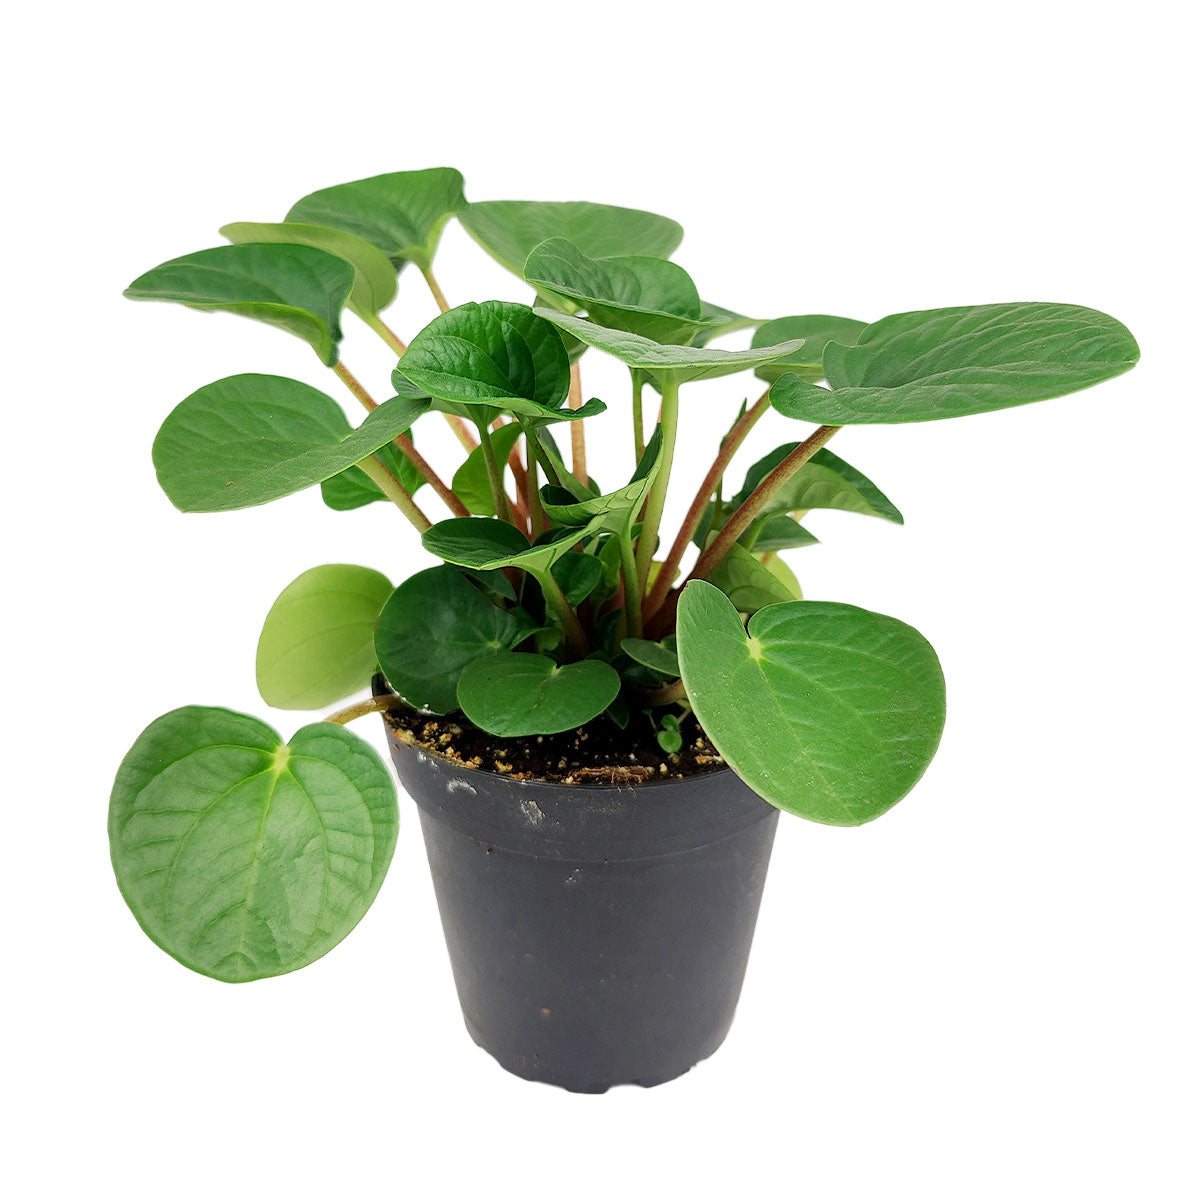 Peperomia Rana Verde, Ripple Peperomia, semi-succulent houseplant, easy to care for houseplant for beginners